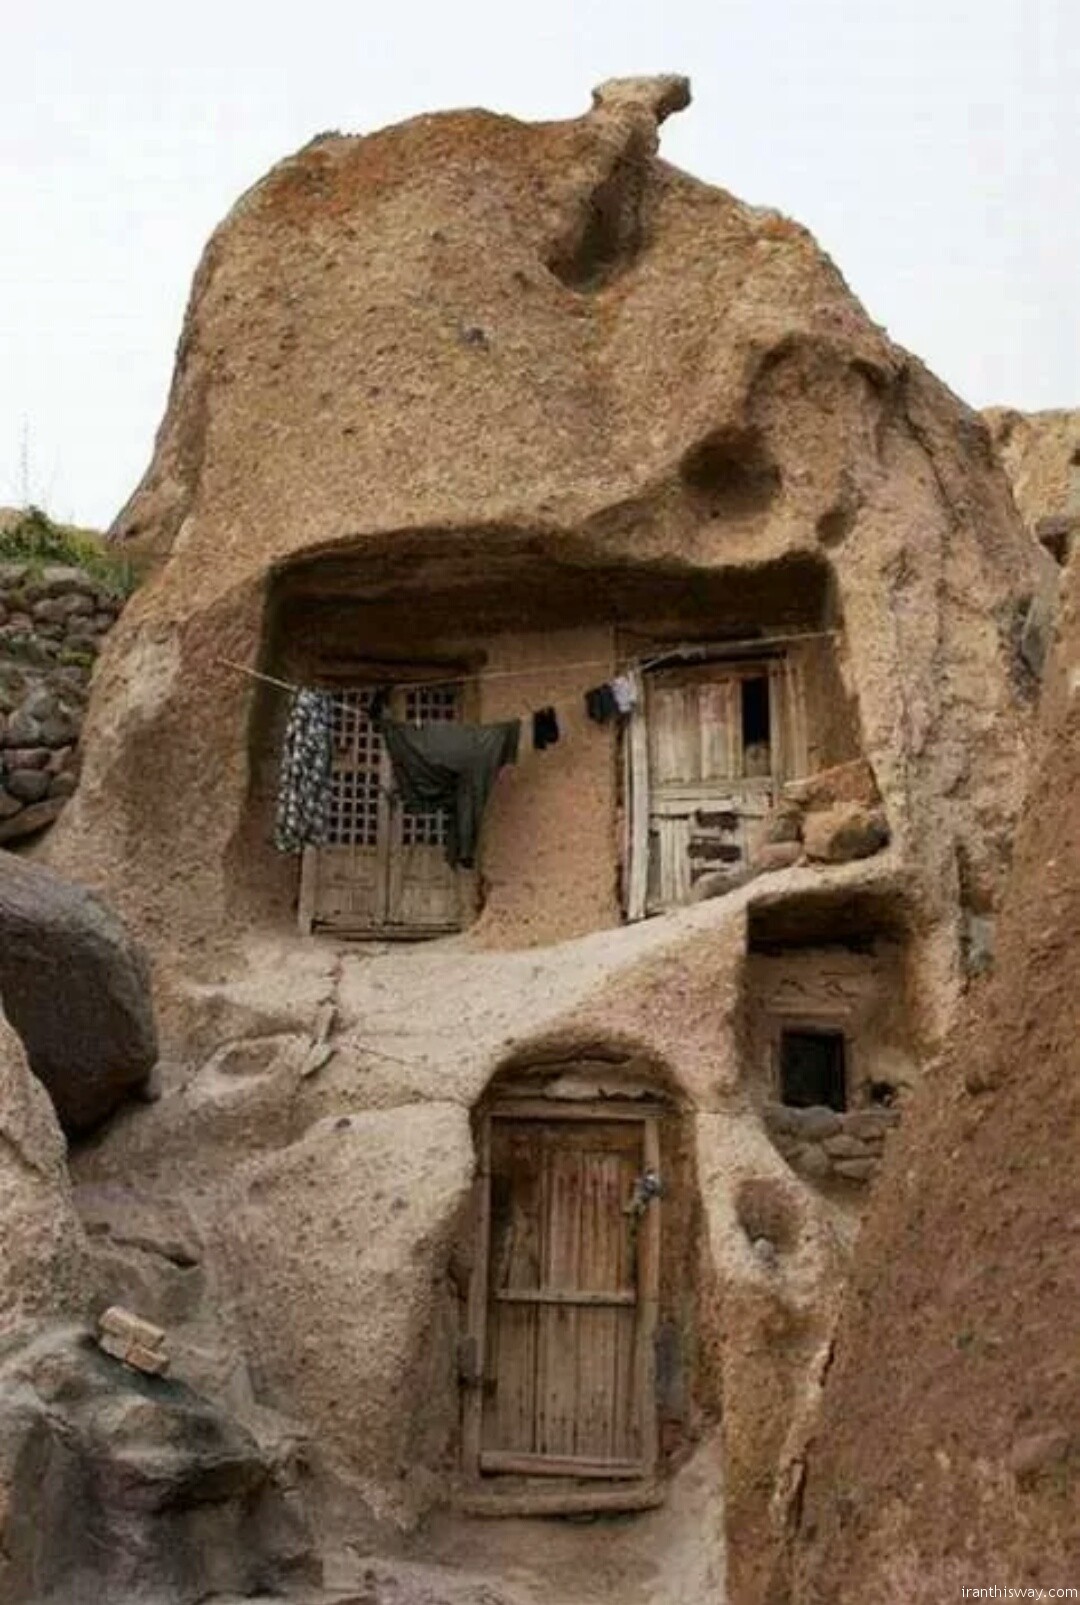 The historic Kandovan village located in northwest Iran is filled with scenic troglodyte homes in the shape of stony ice-cream cones which are still inhabited.